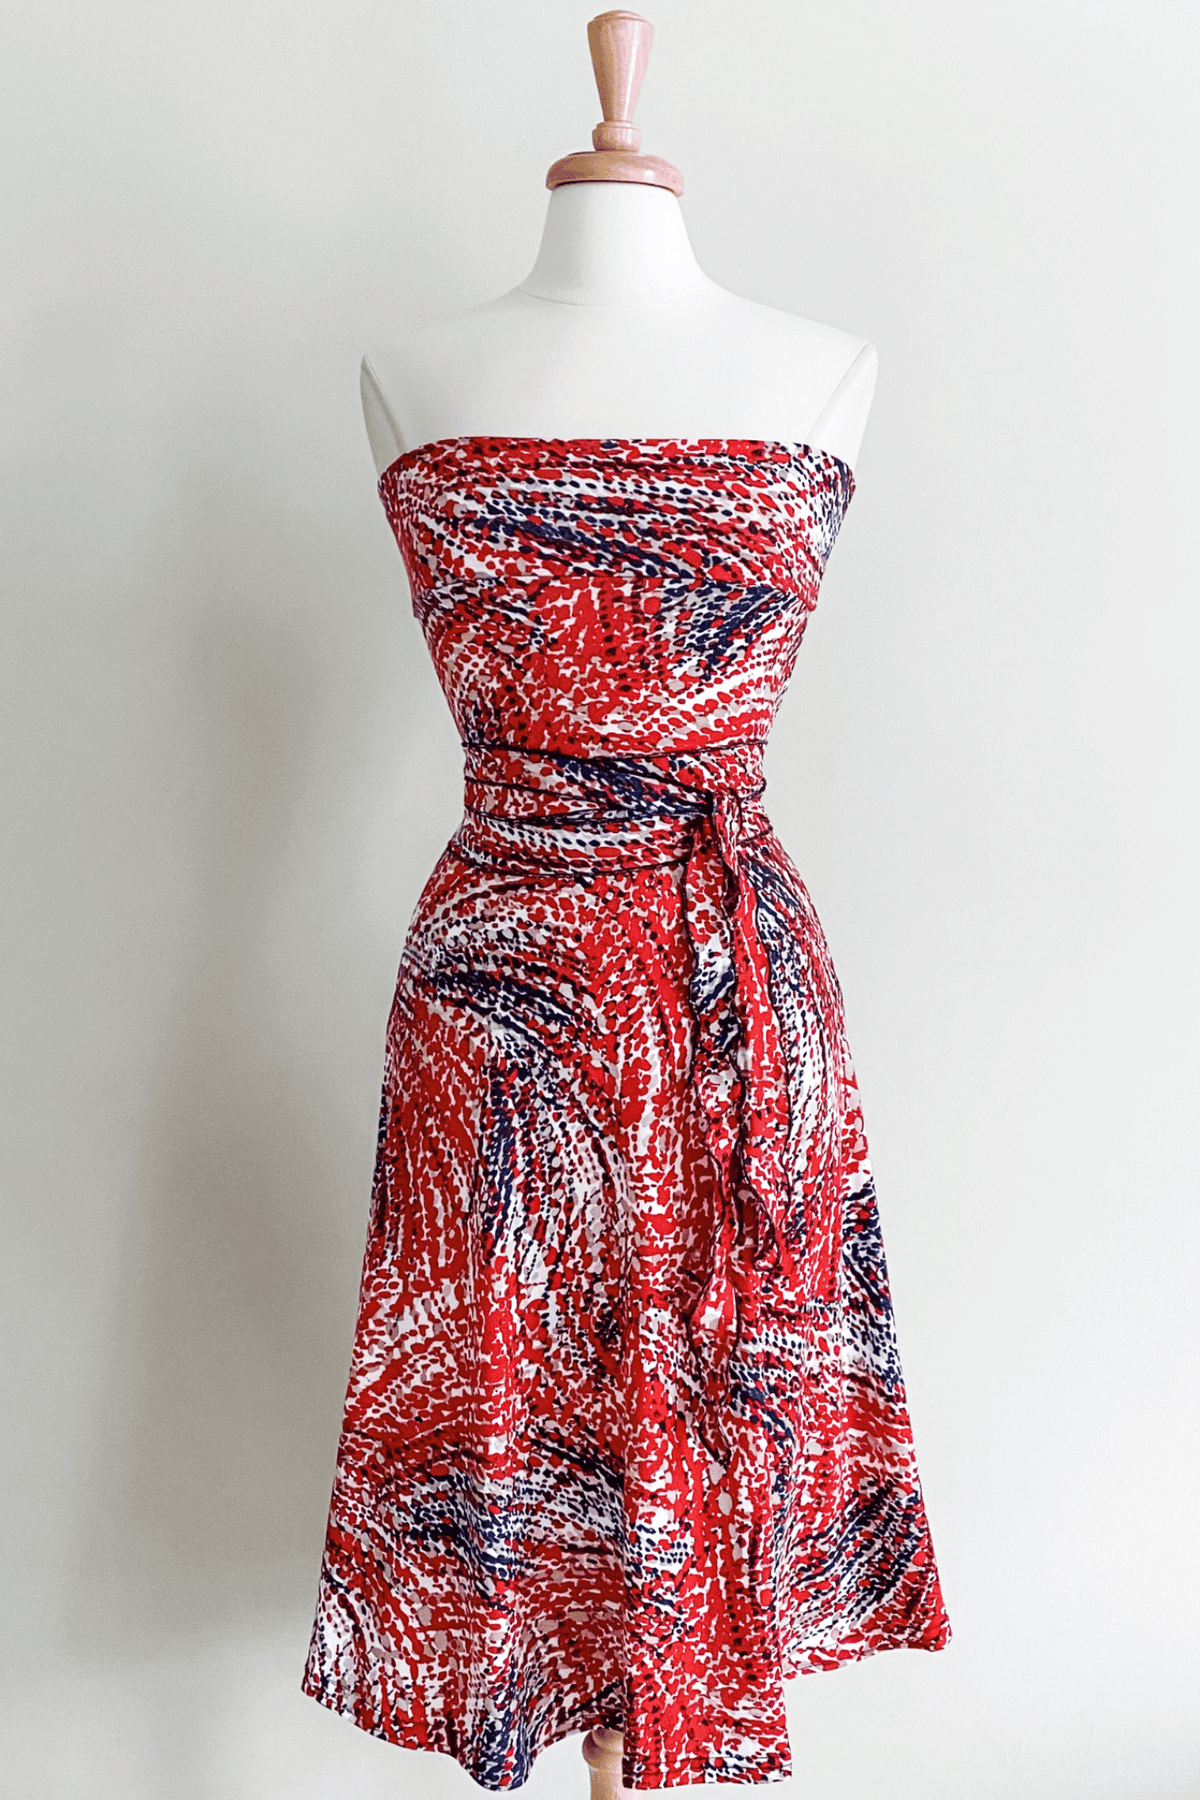 Diane Kroe Sash Prints (Whirlpool Red Navy) - Warm Weather Capsule Collection